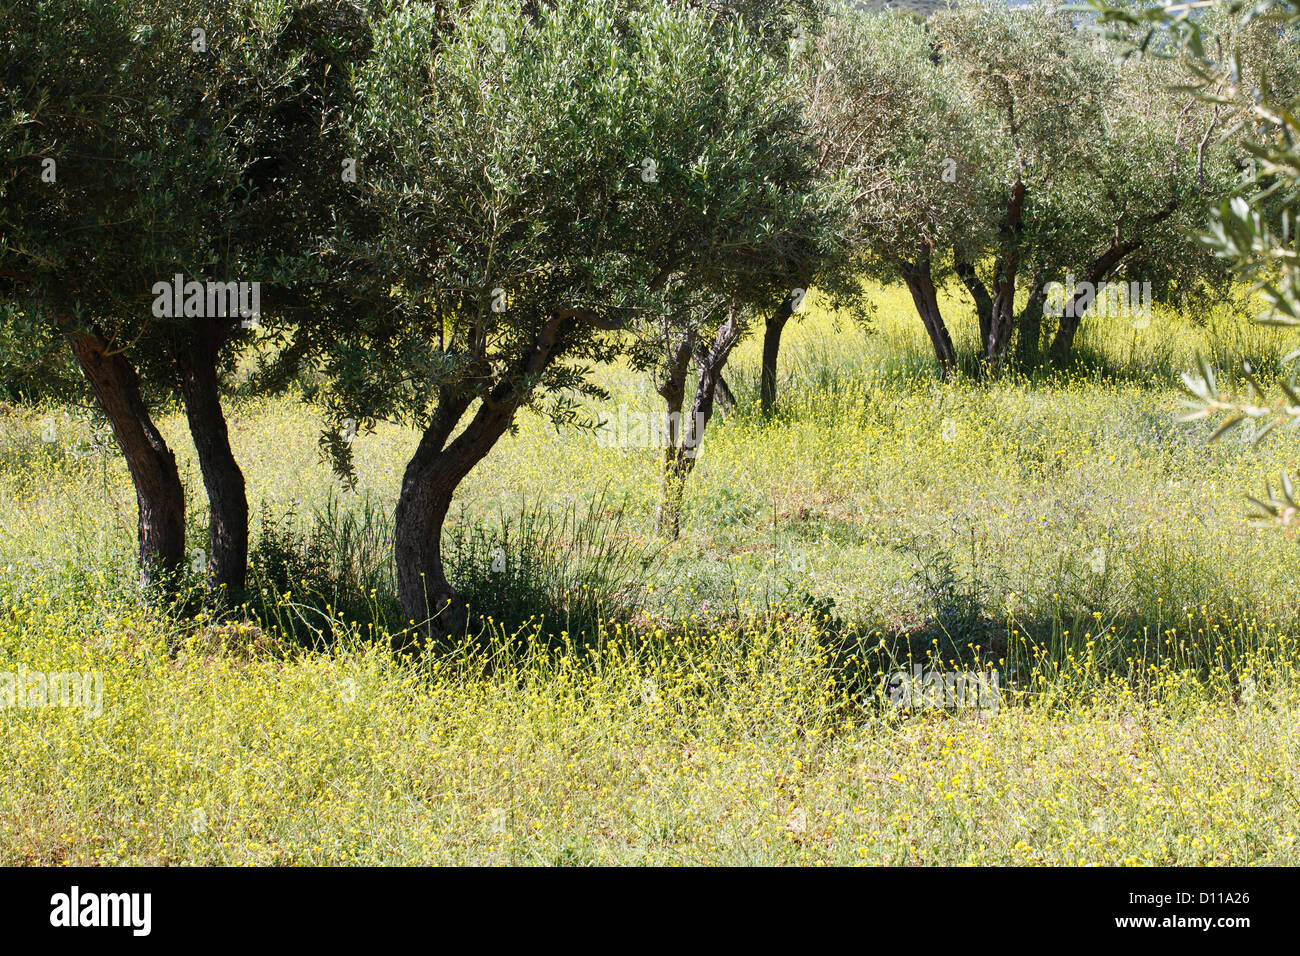 Hedge Mustard (Sisymbrium officinale) massed flowering in an Olive (Olea europea) orchard. Provence, France. Stock Photo